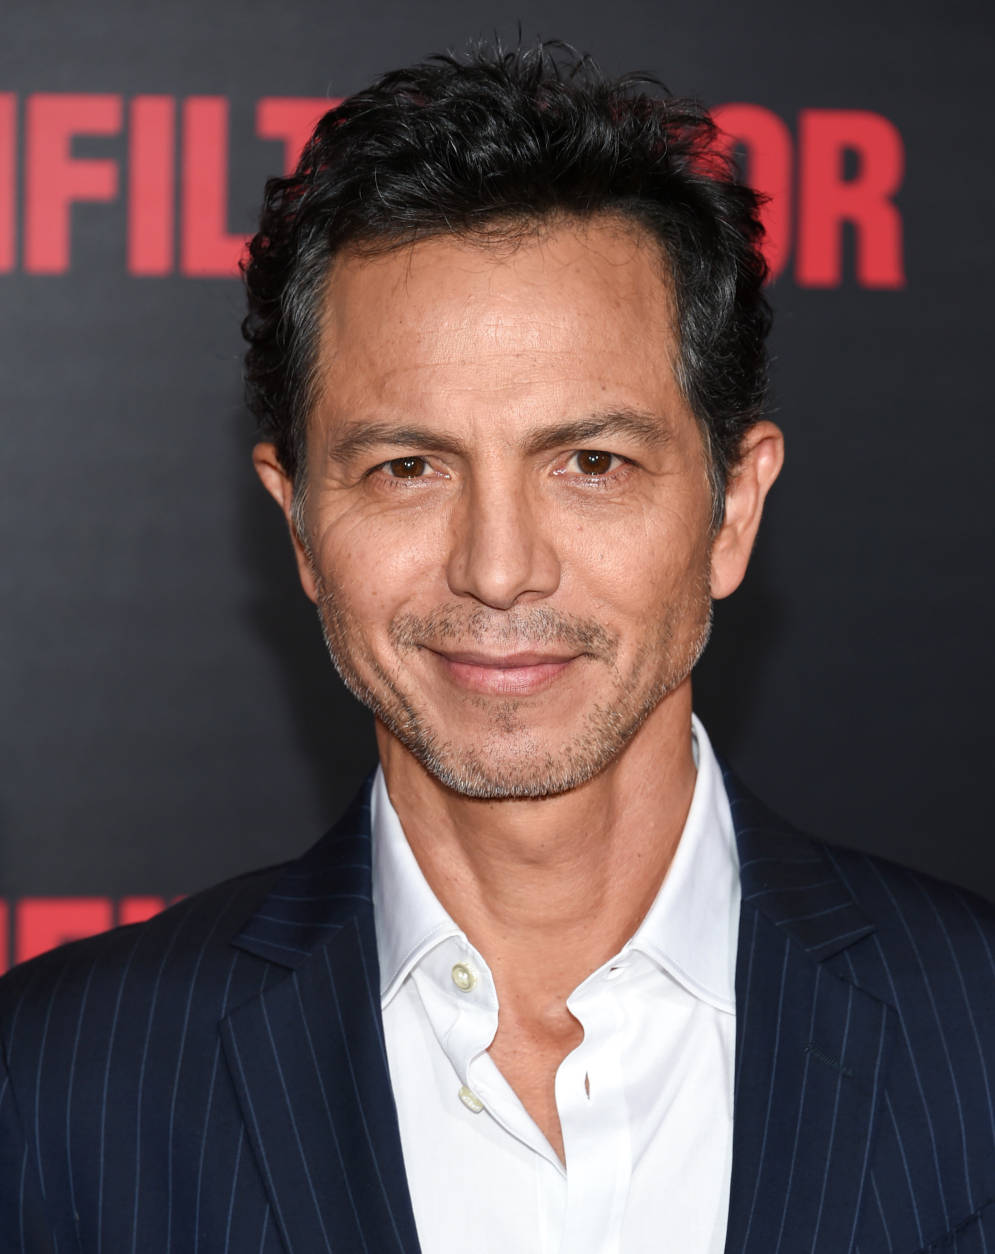 Actor Benjamin Bratt attends the premiere of "The Infiltrator" at AMC Loews Lincoln Square on Monday, July 11, 2016, in New York. (Photo by Evan Agostini/Invision/AP)